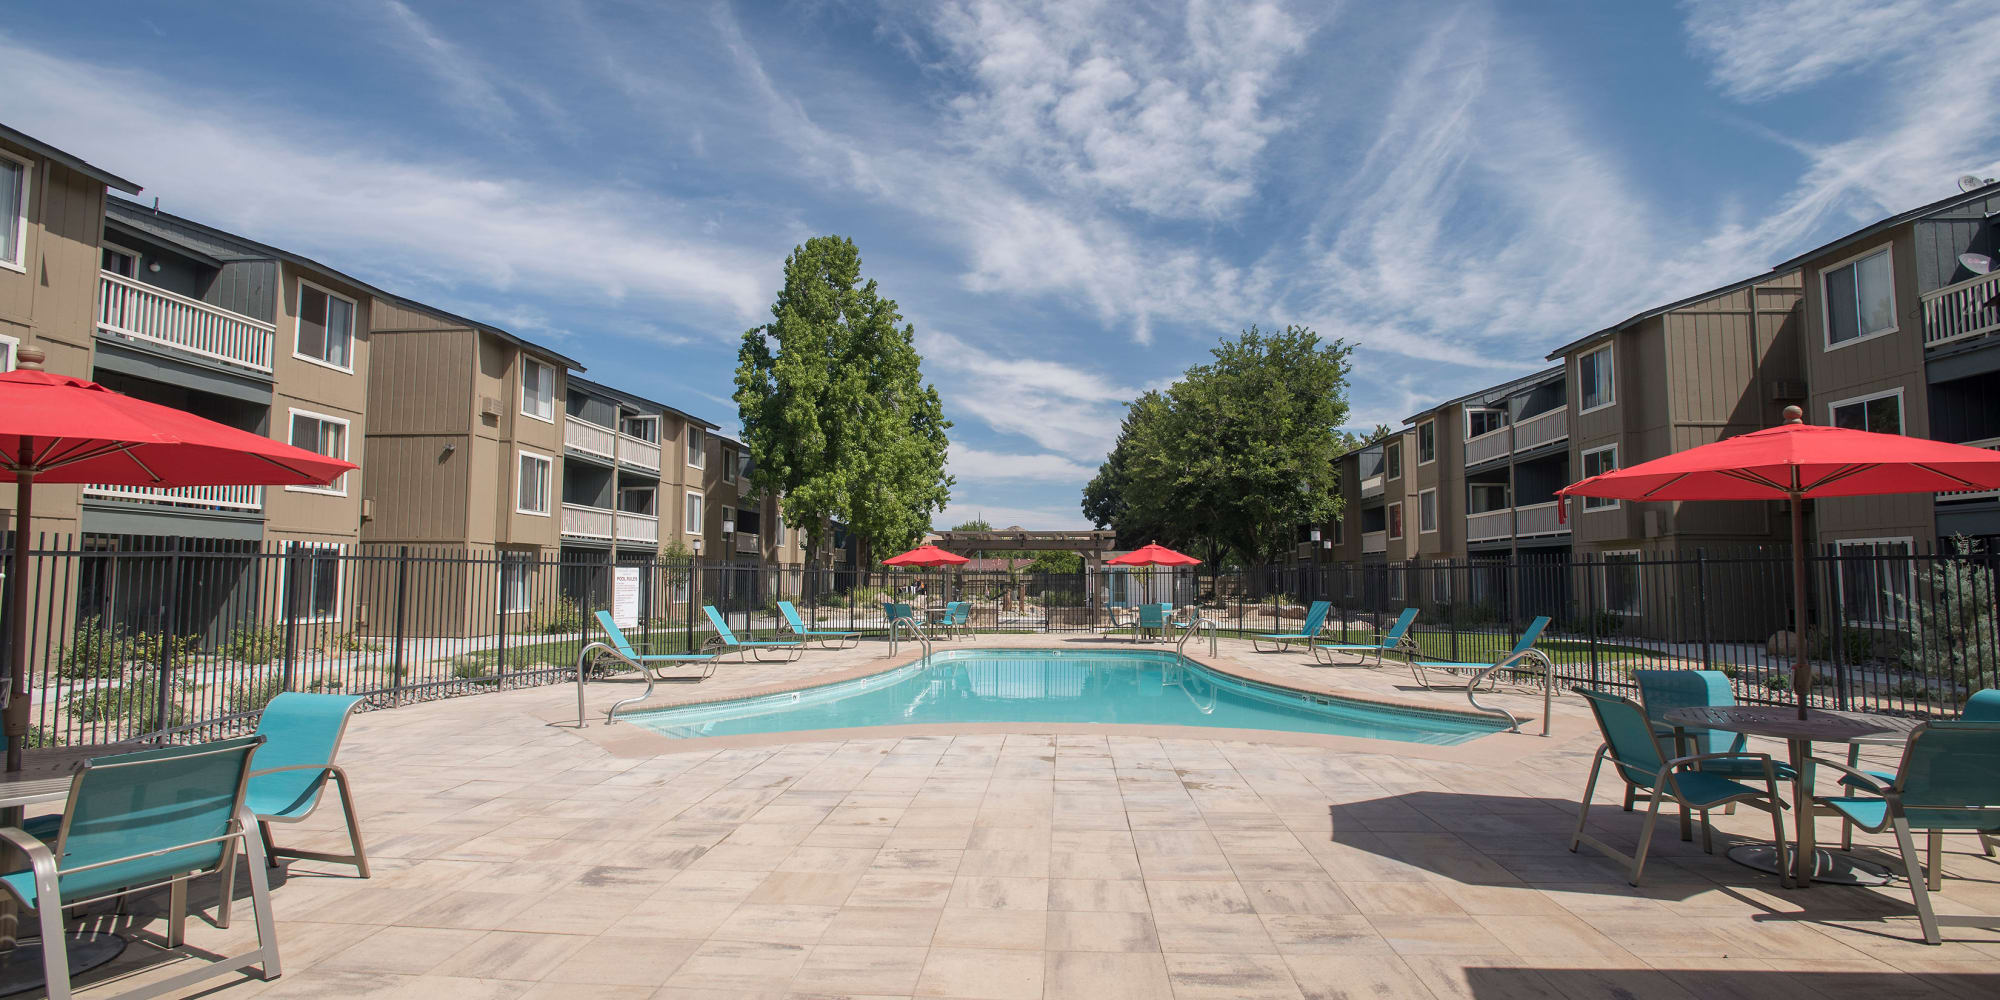 Swimming pool and sundeck at Keyway Apartments in Sparks, Nevada